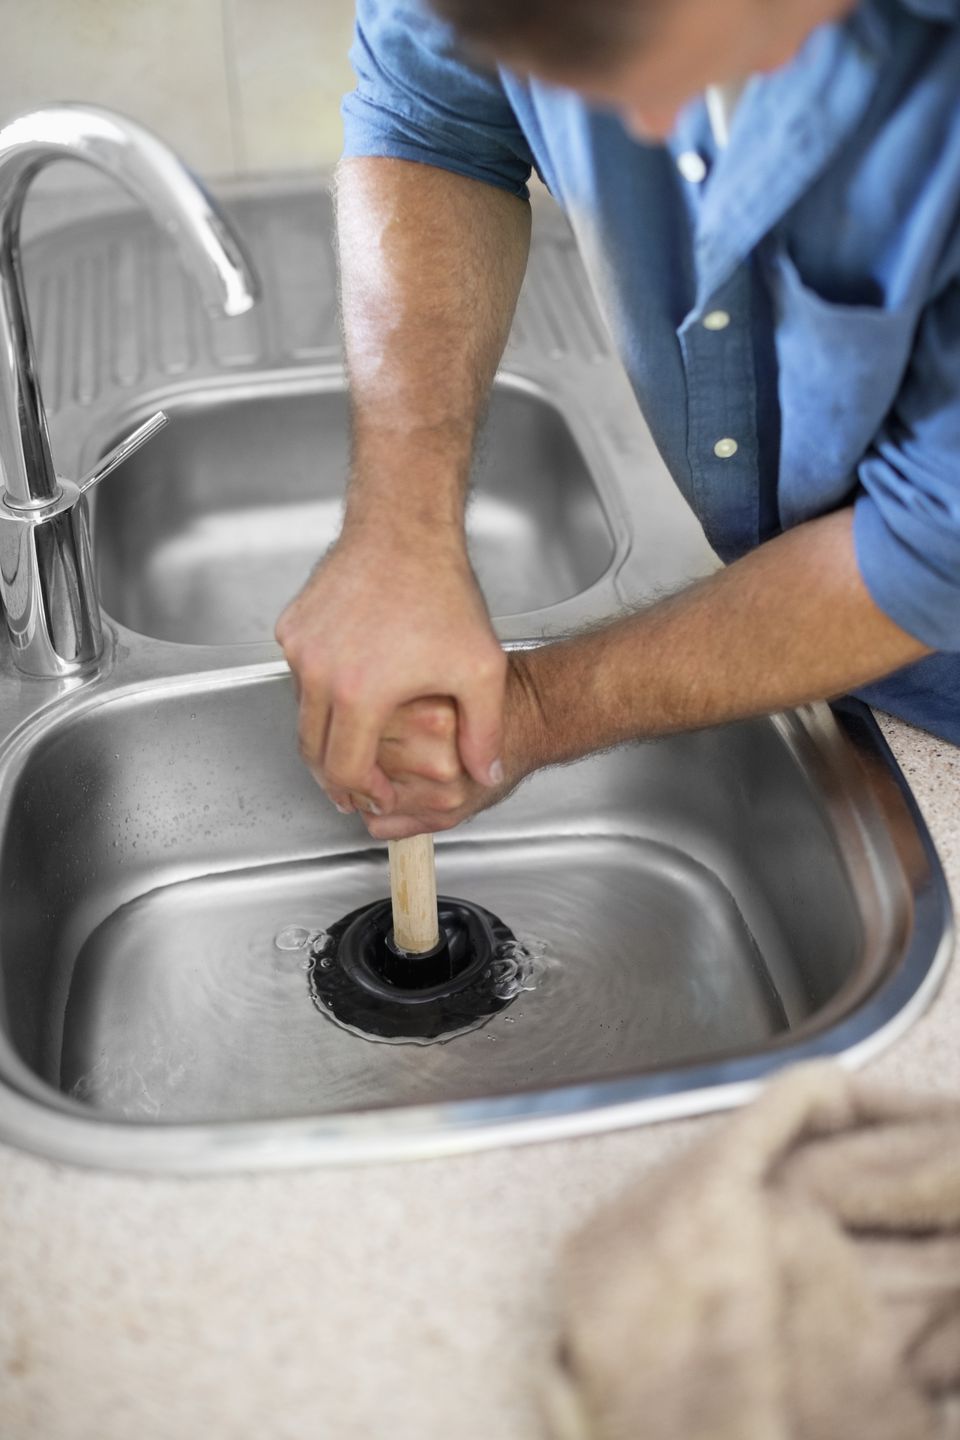 Three Simple Ways to Unclog a Sink Drain